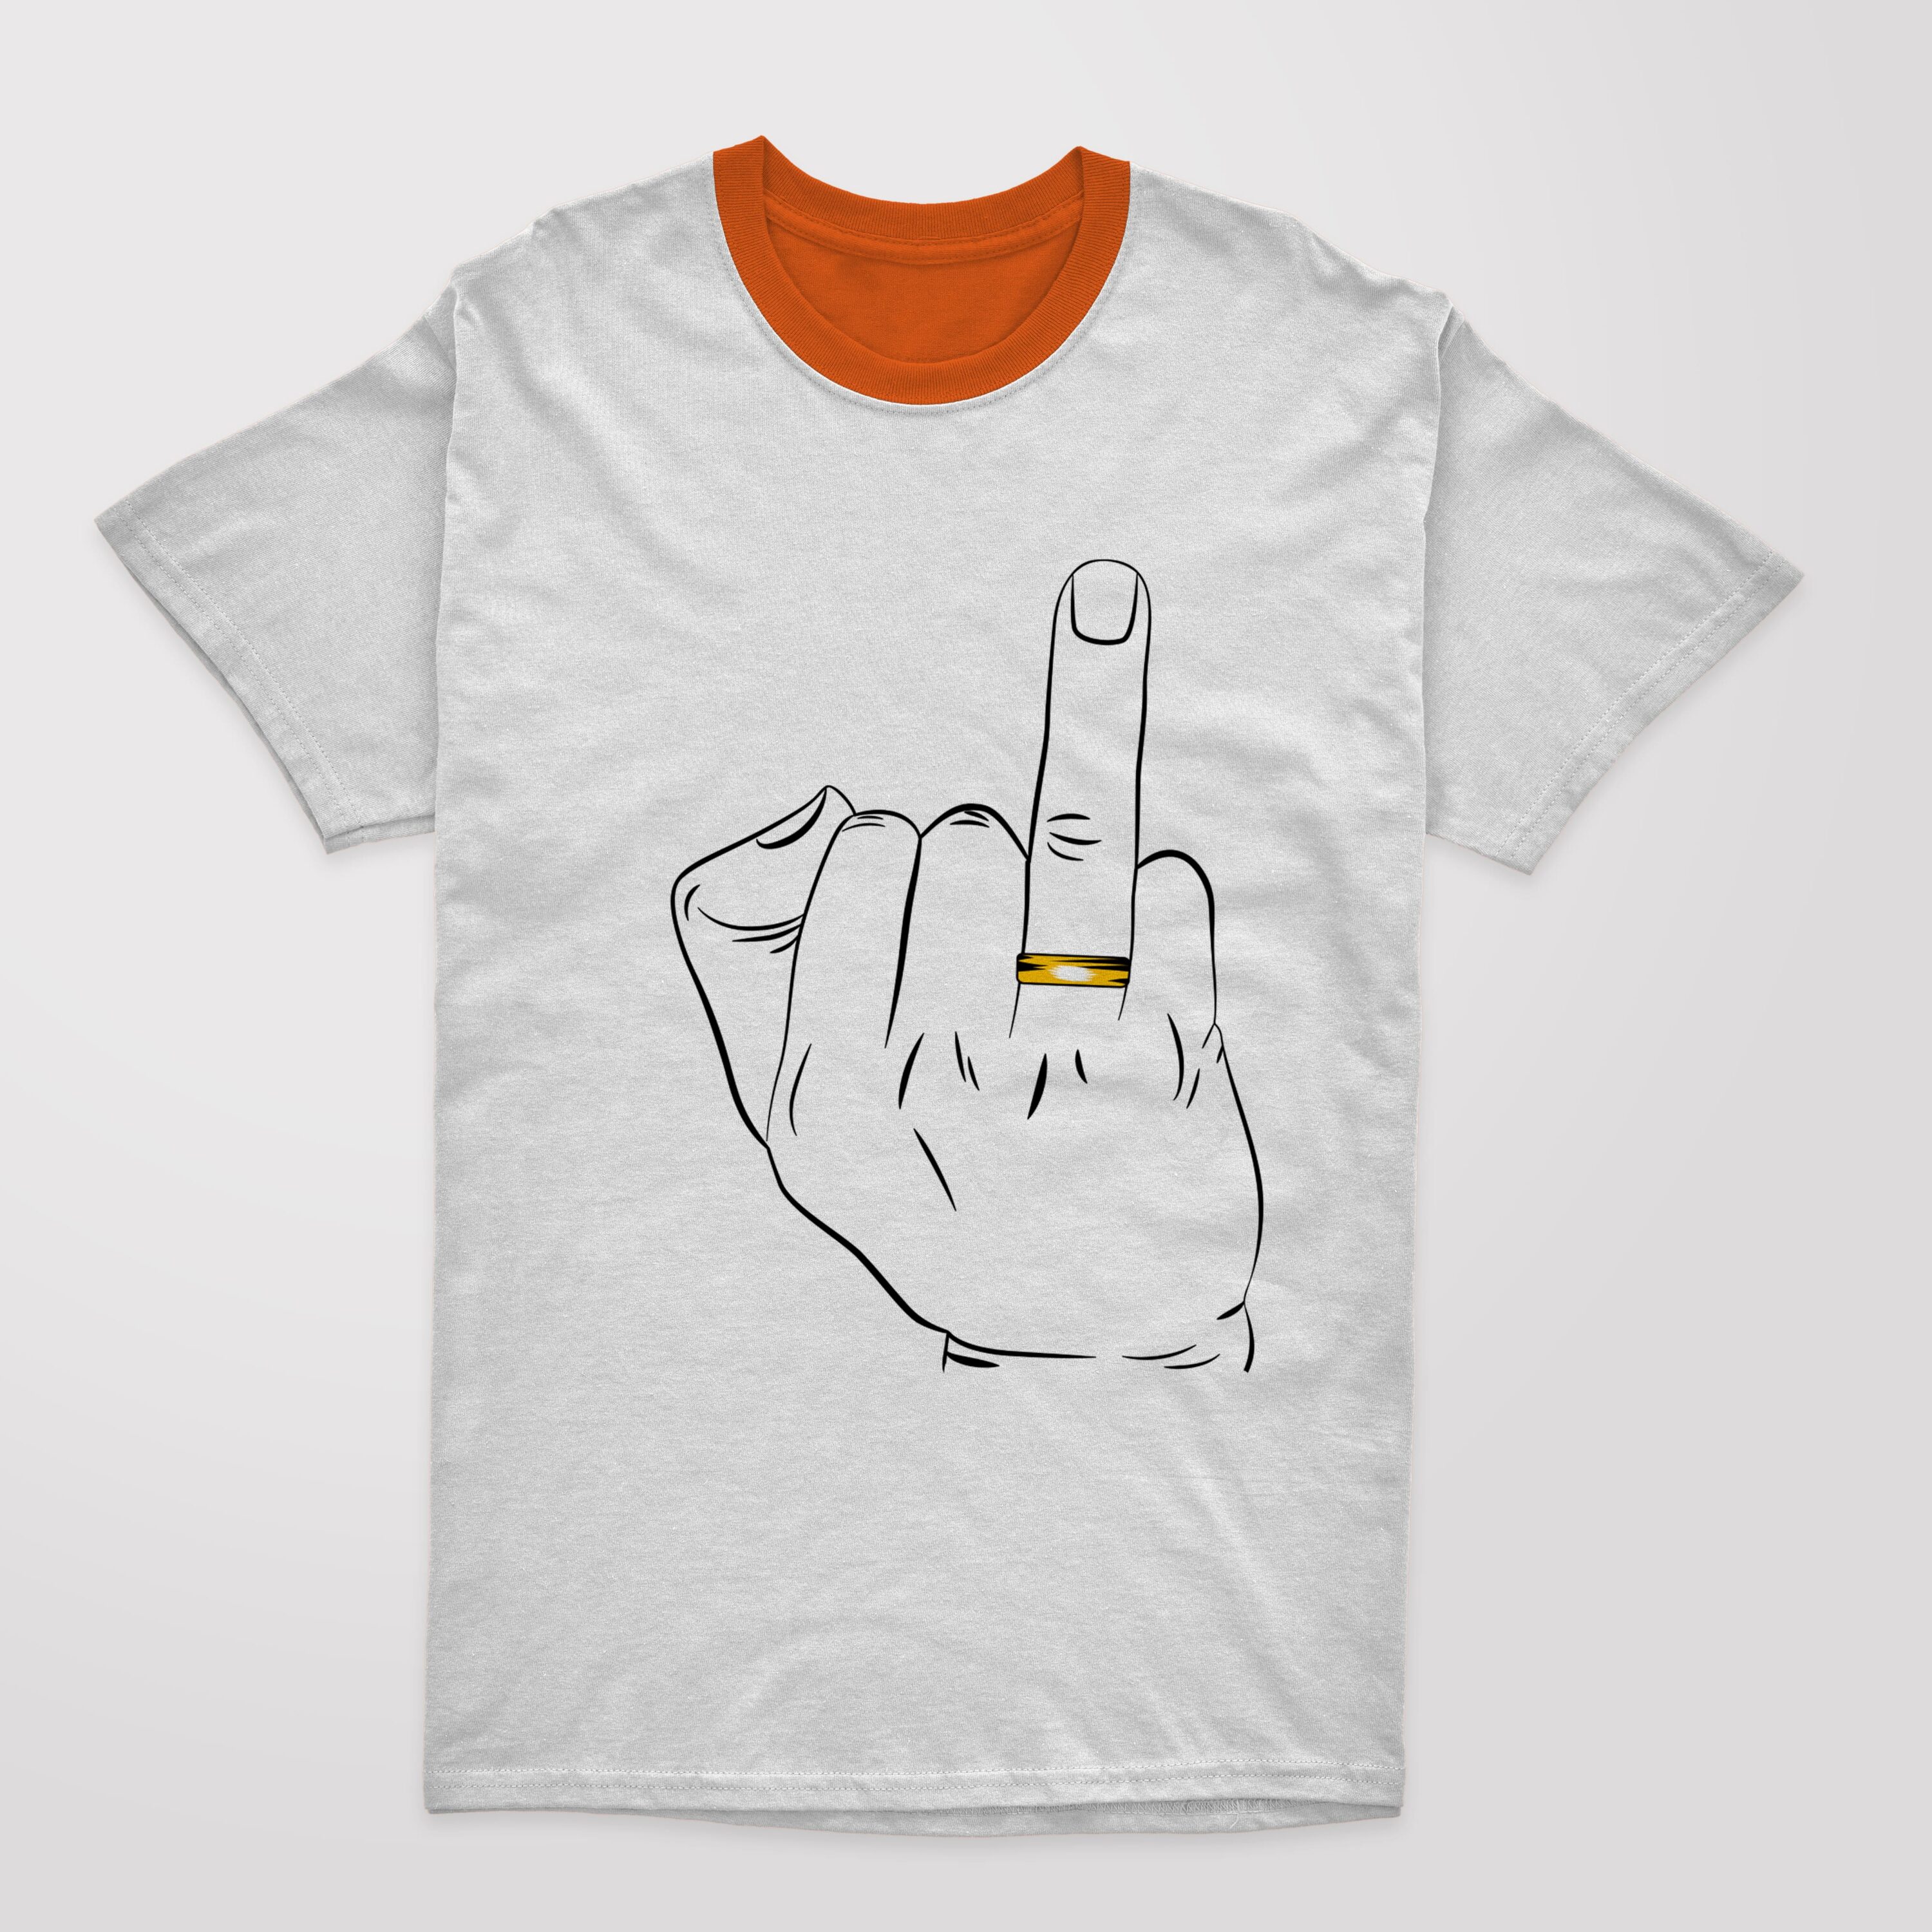 Image of a T-shirt with a charming print of a male hand with a wedding ring.